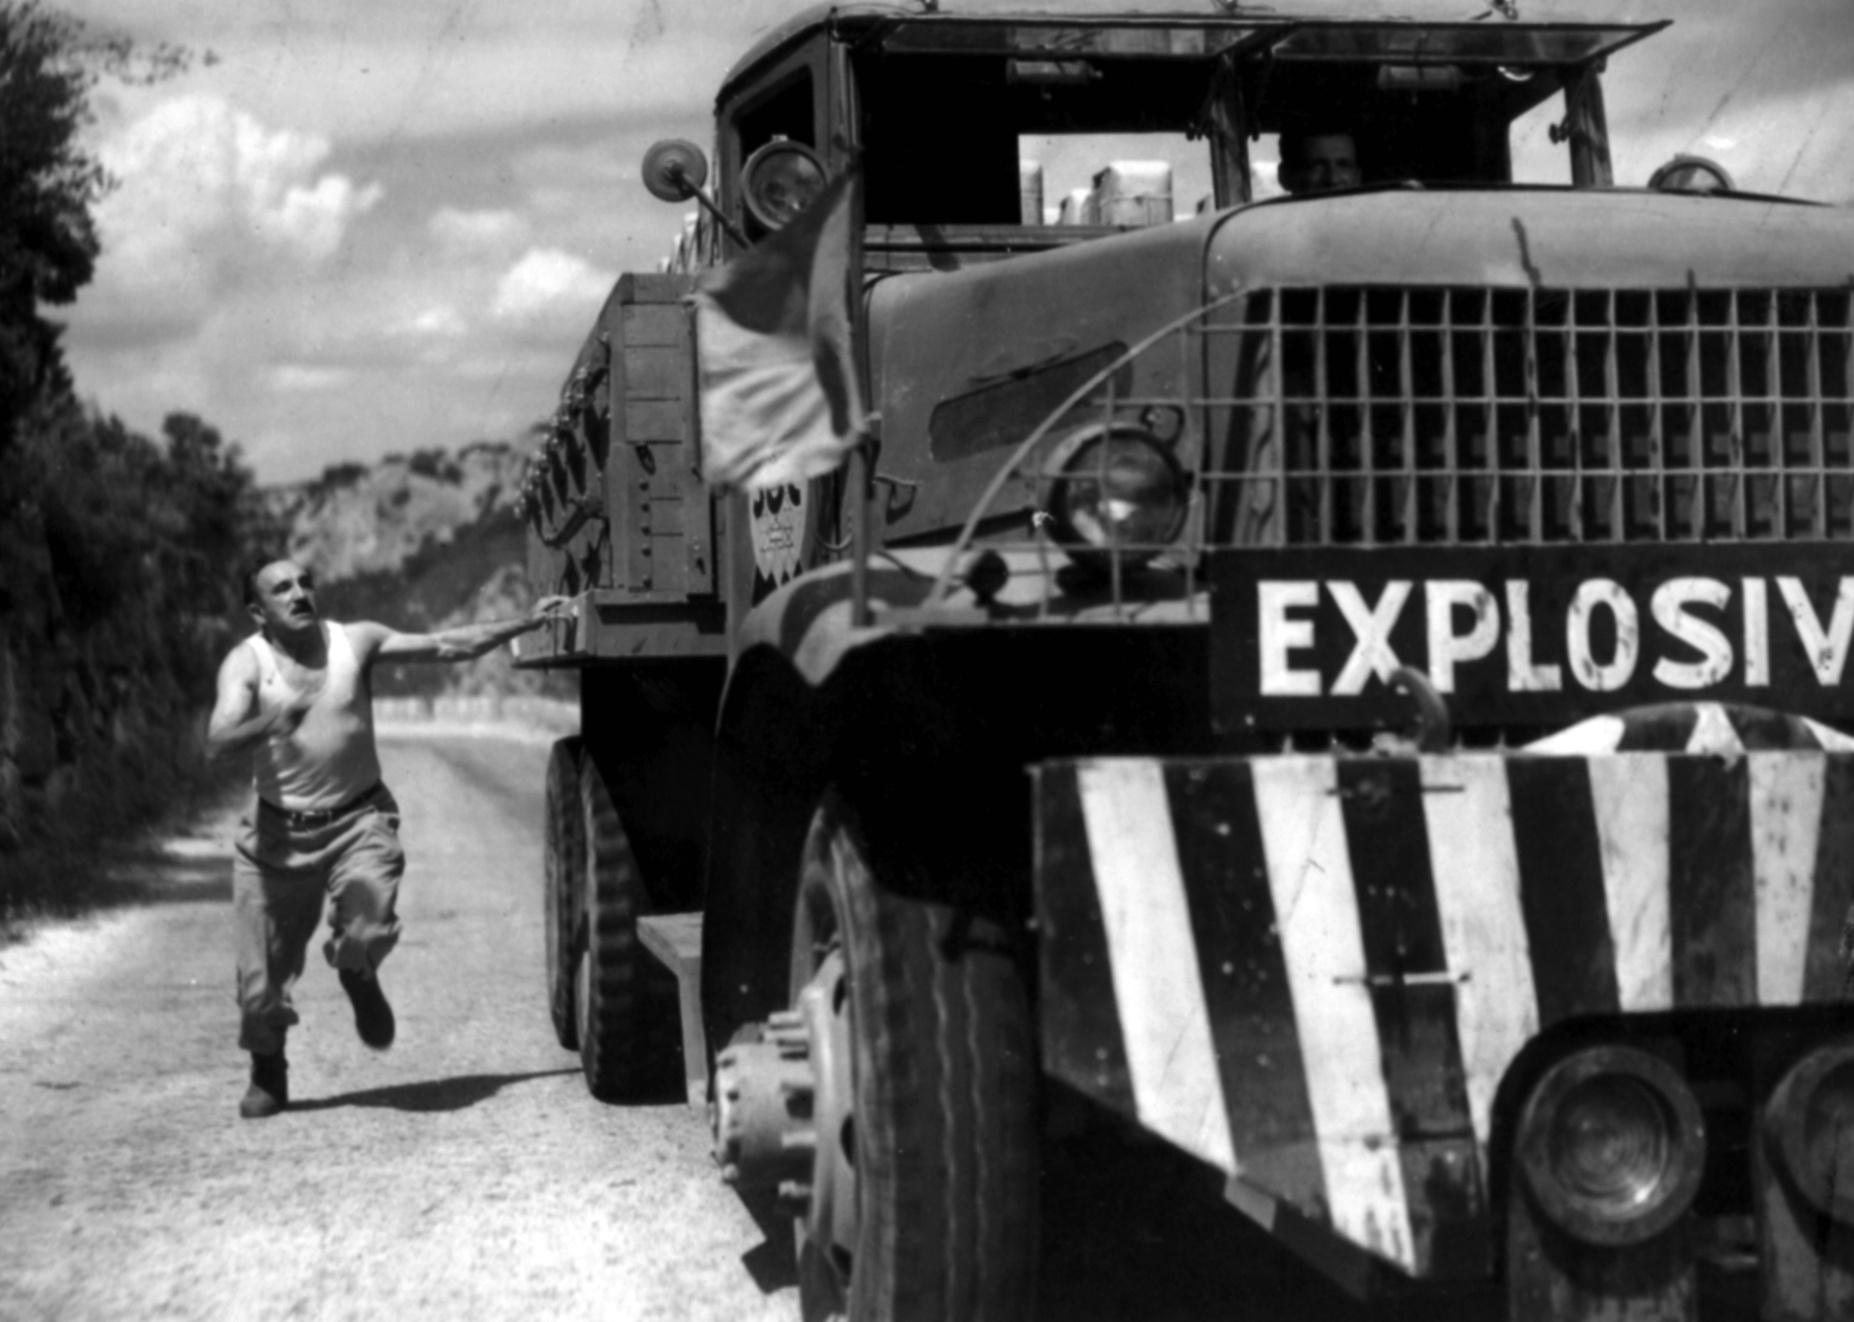 A man running next to a truck labeled as explosive.